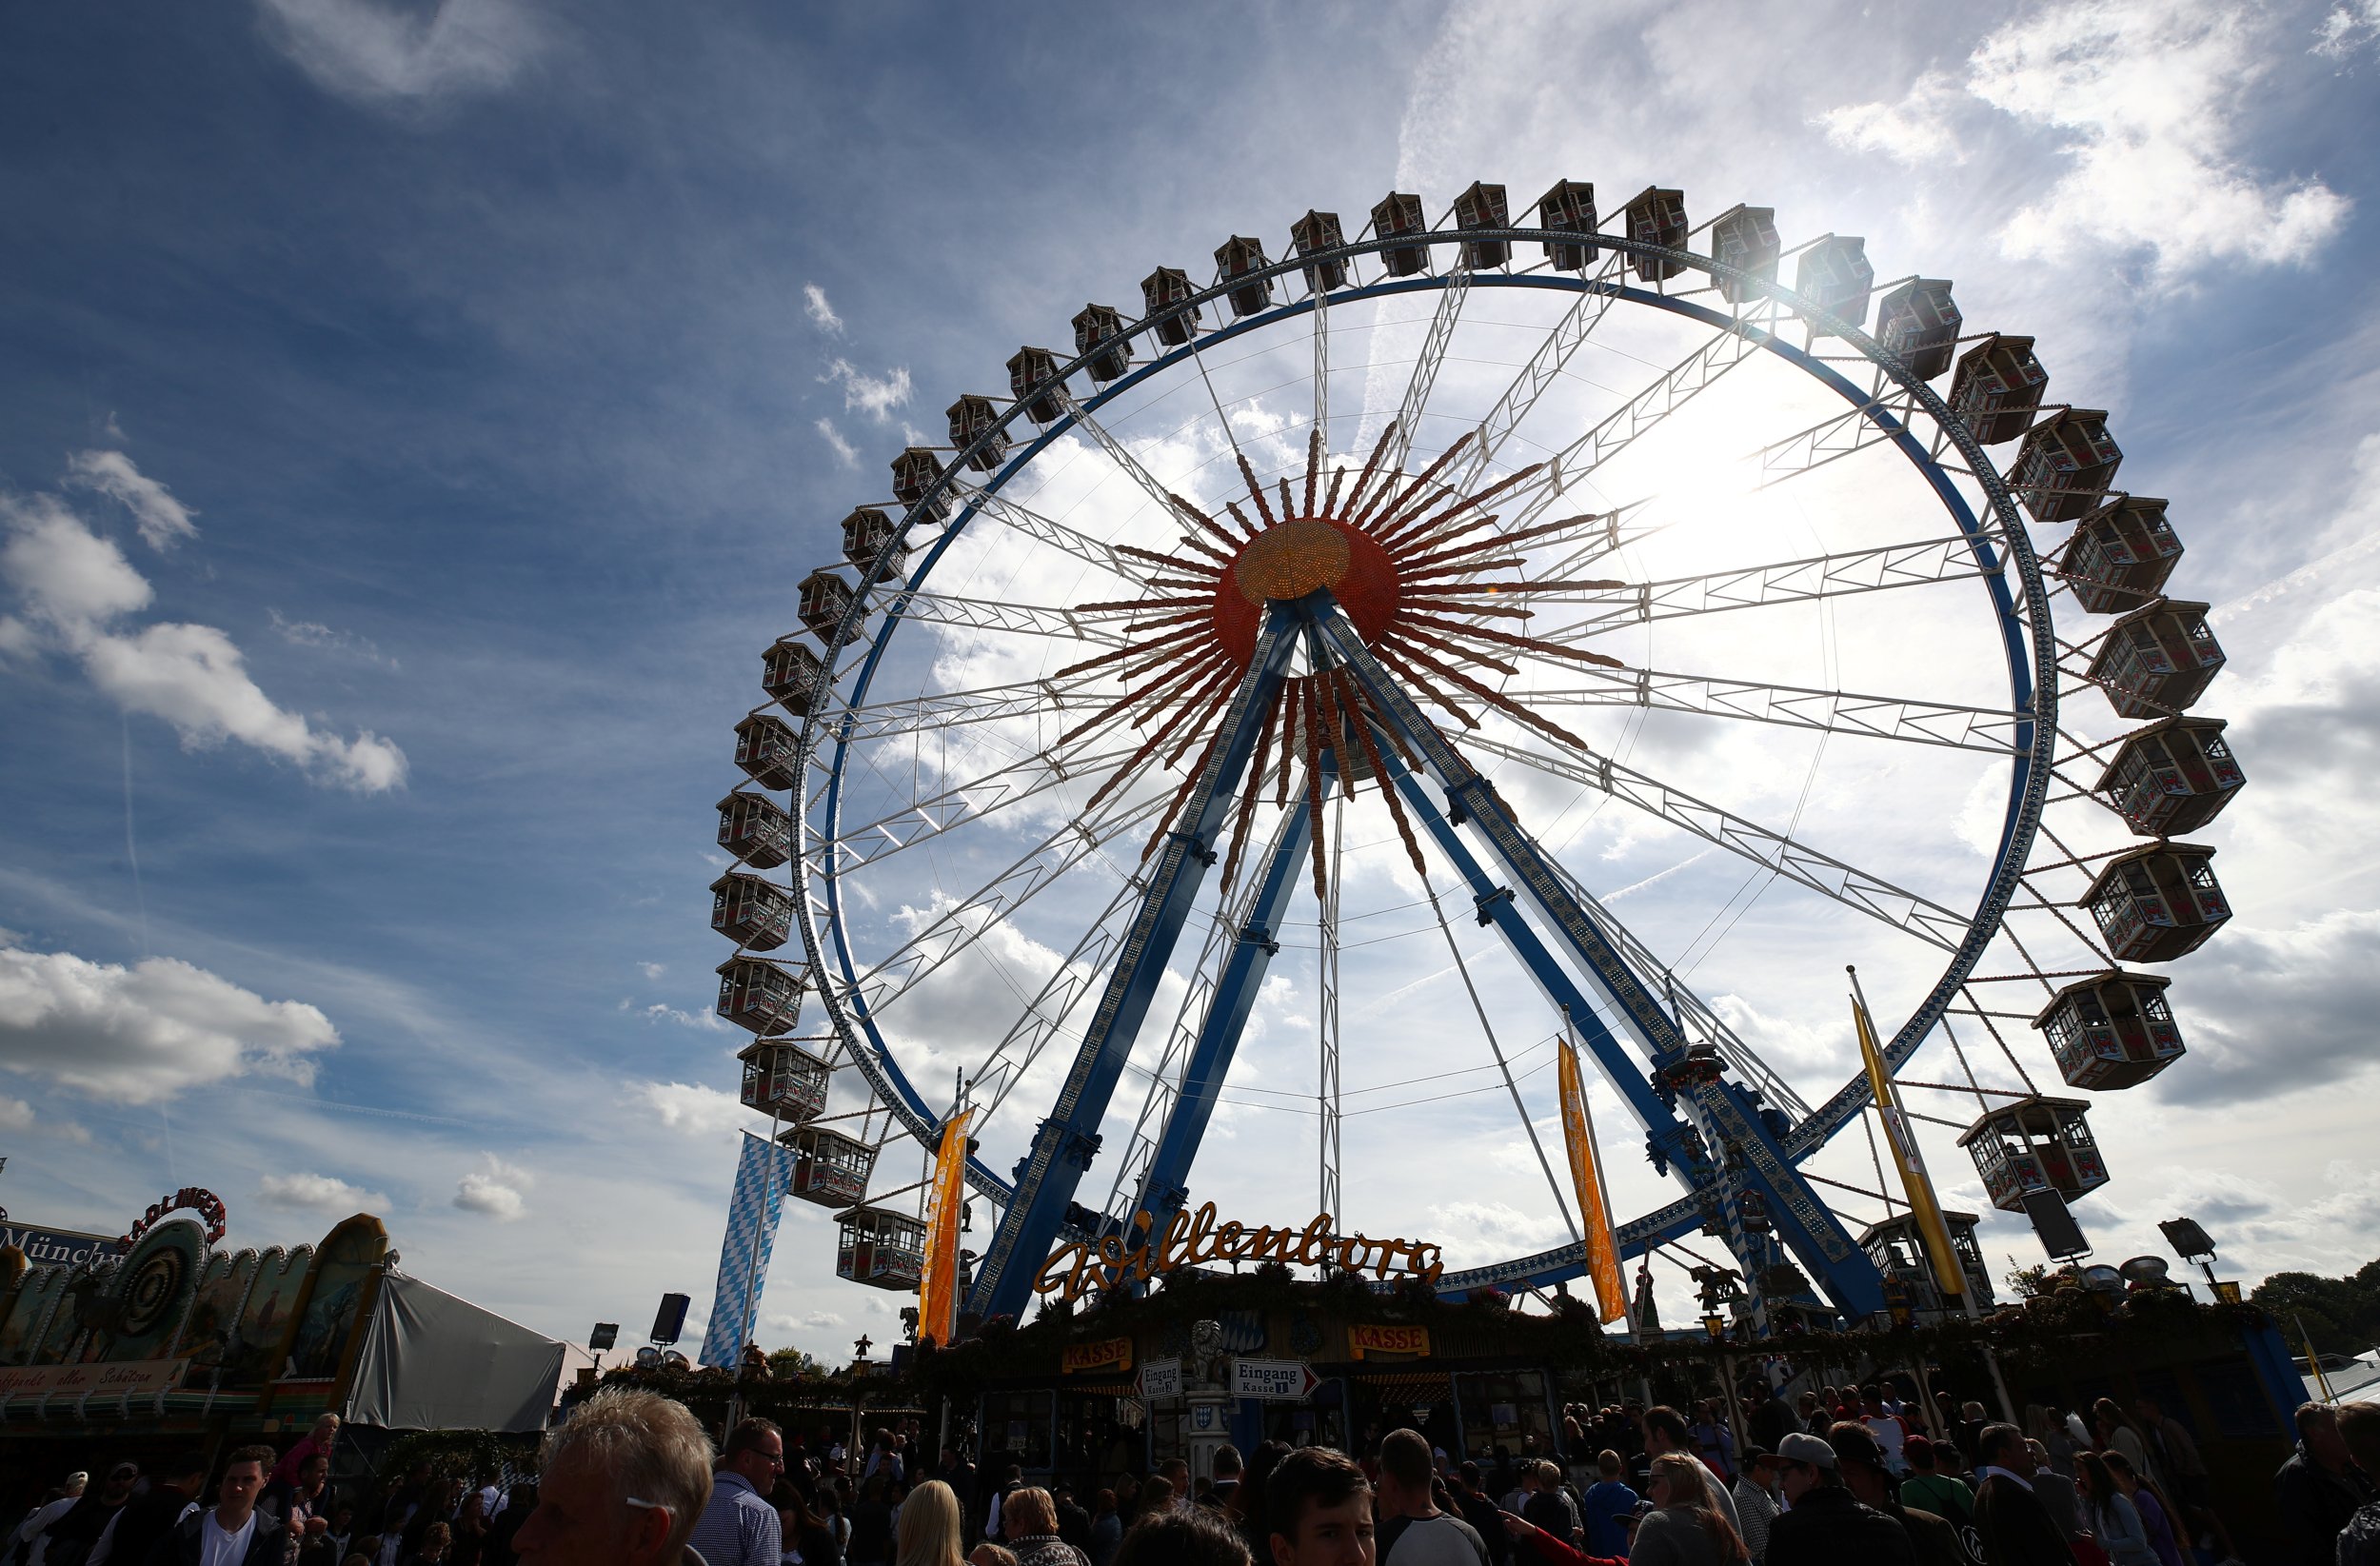 South Carolina Couple Held For Having Sex On Ferris Wheel At Myrtle Beach 1447